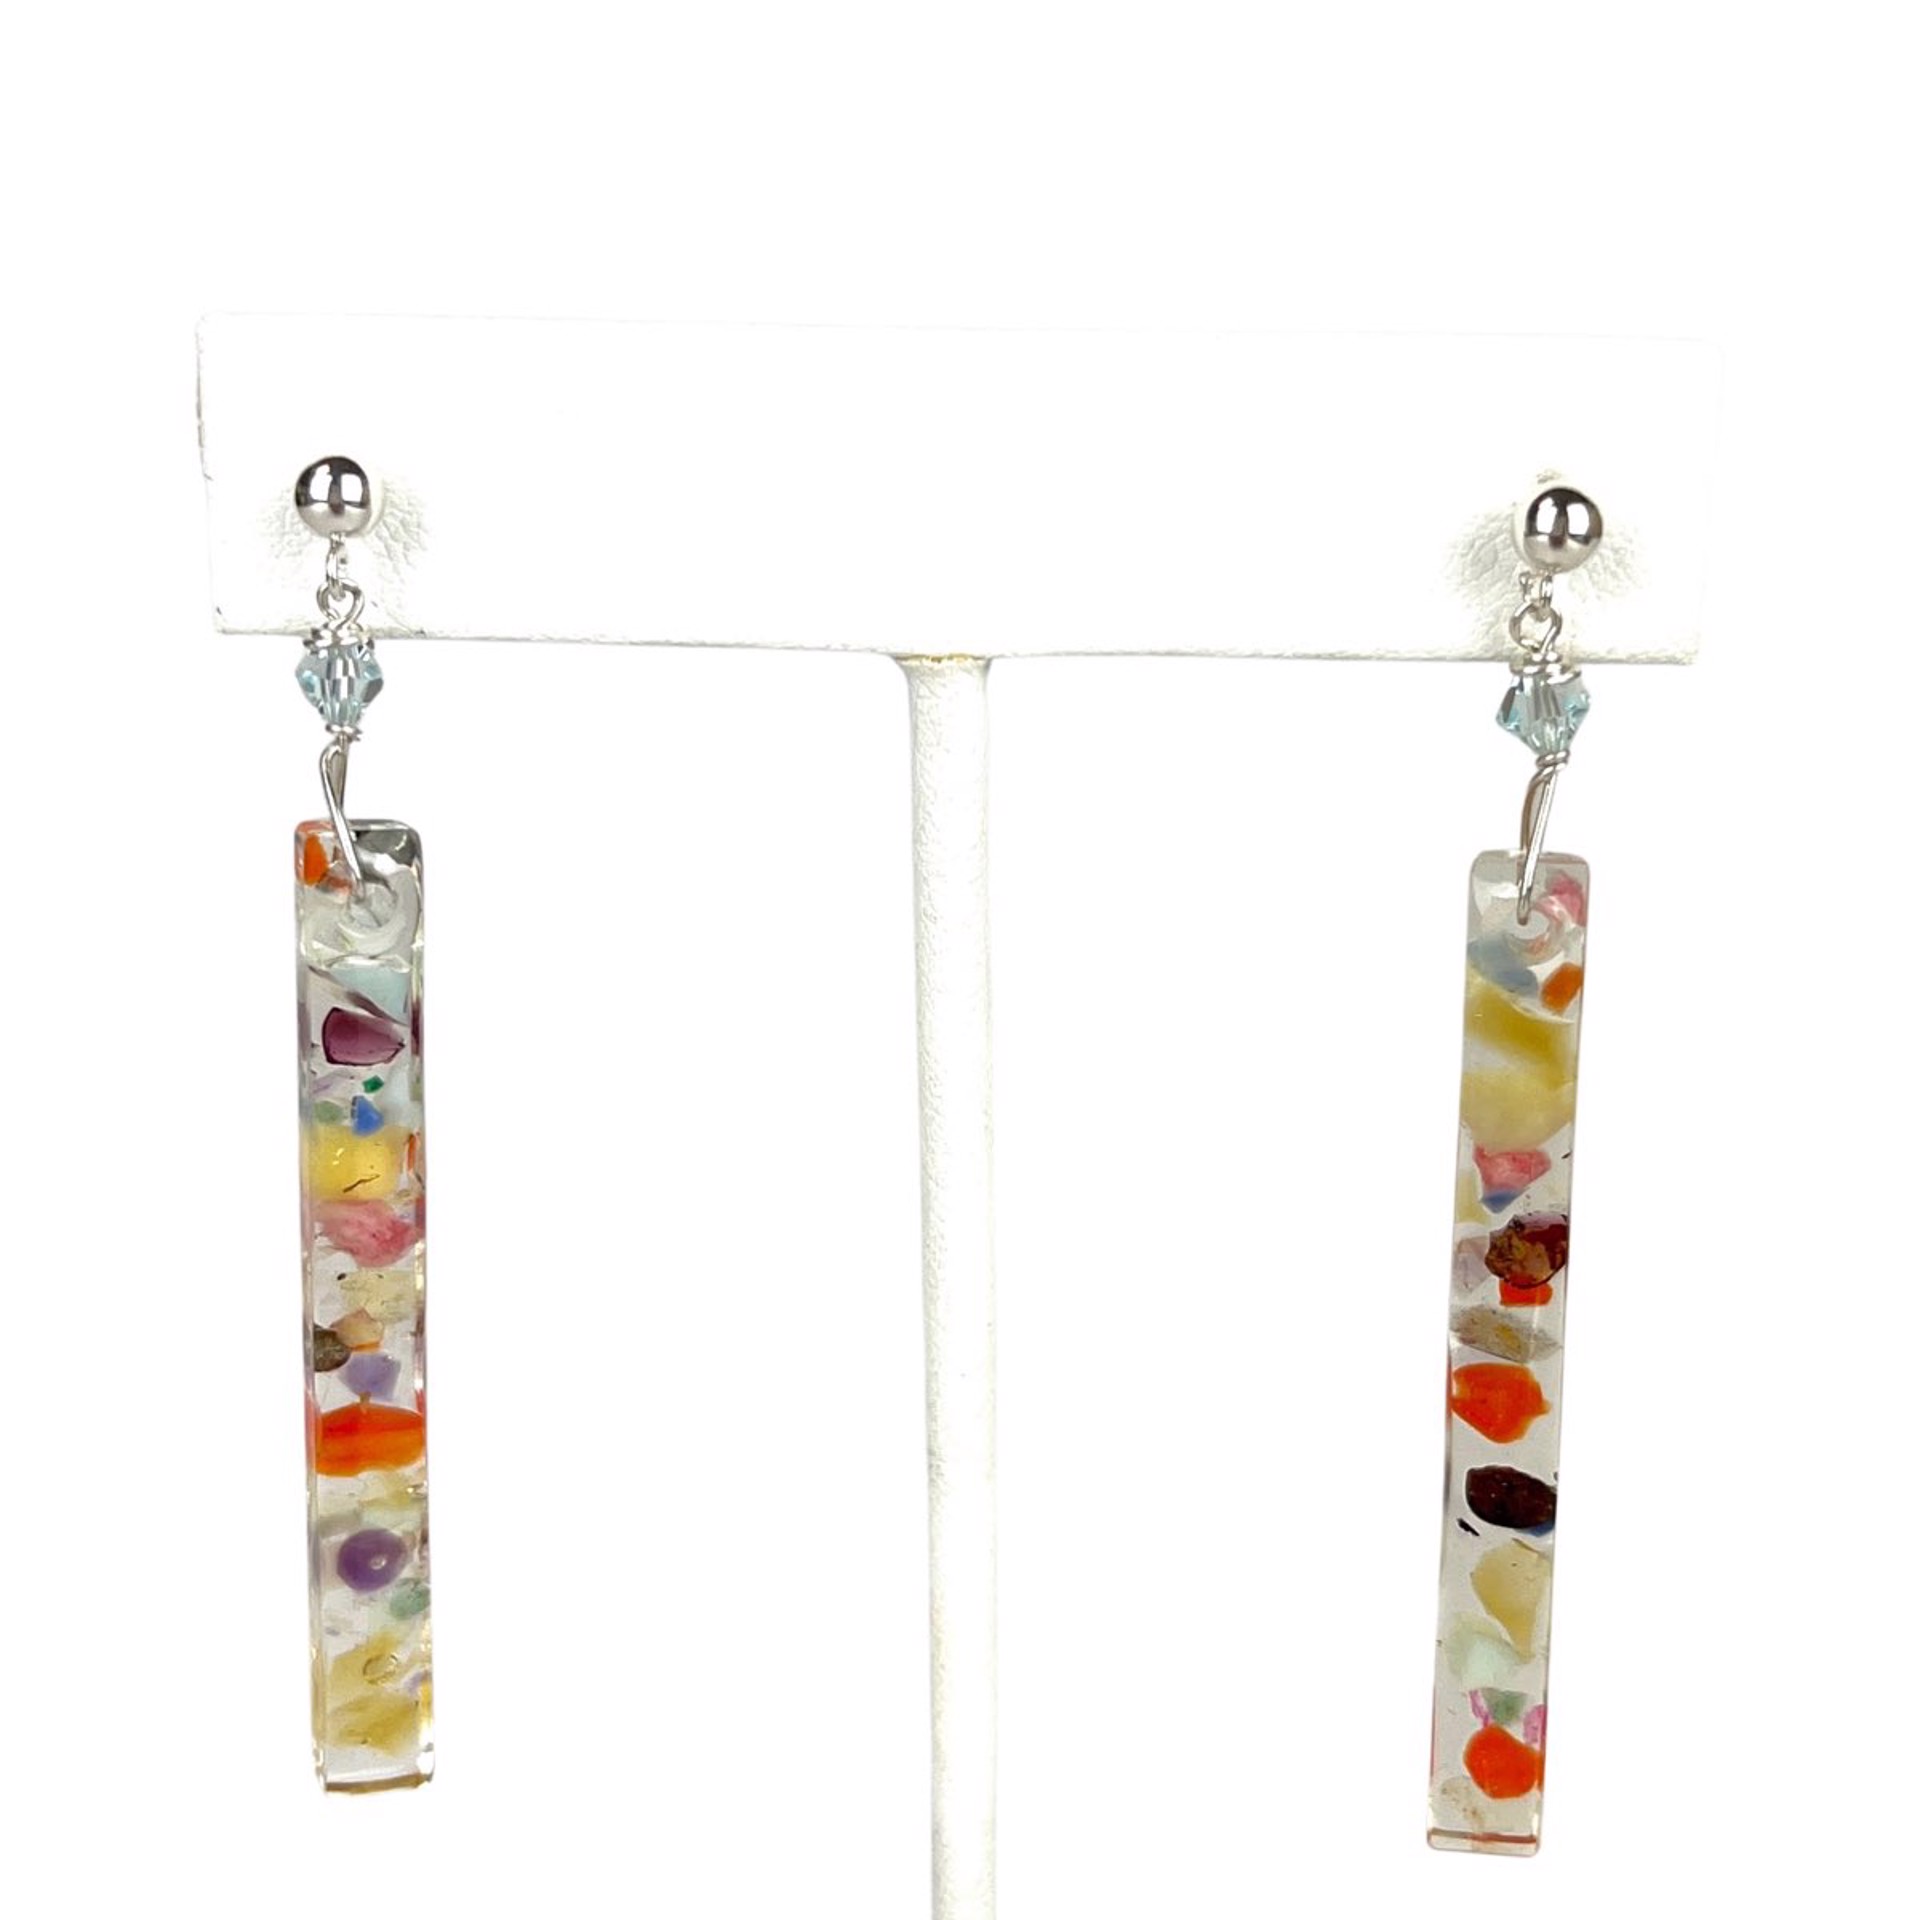 Gemstones in Resin with Sterling Silver Earrings by Nola Smodic